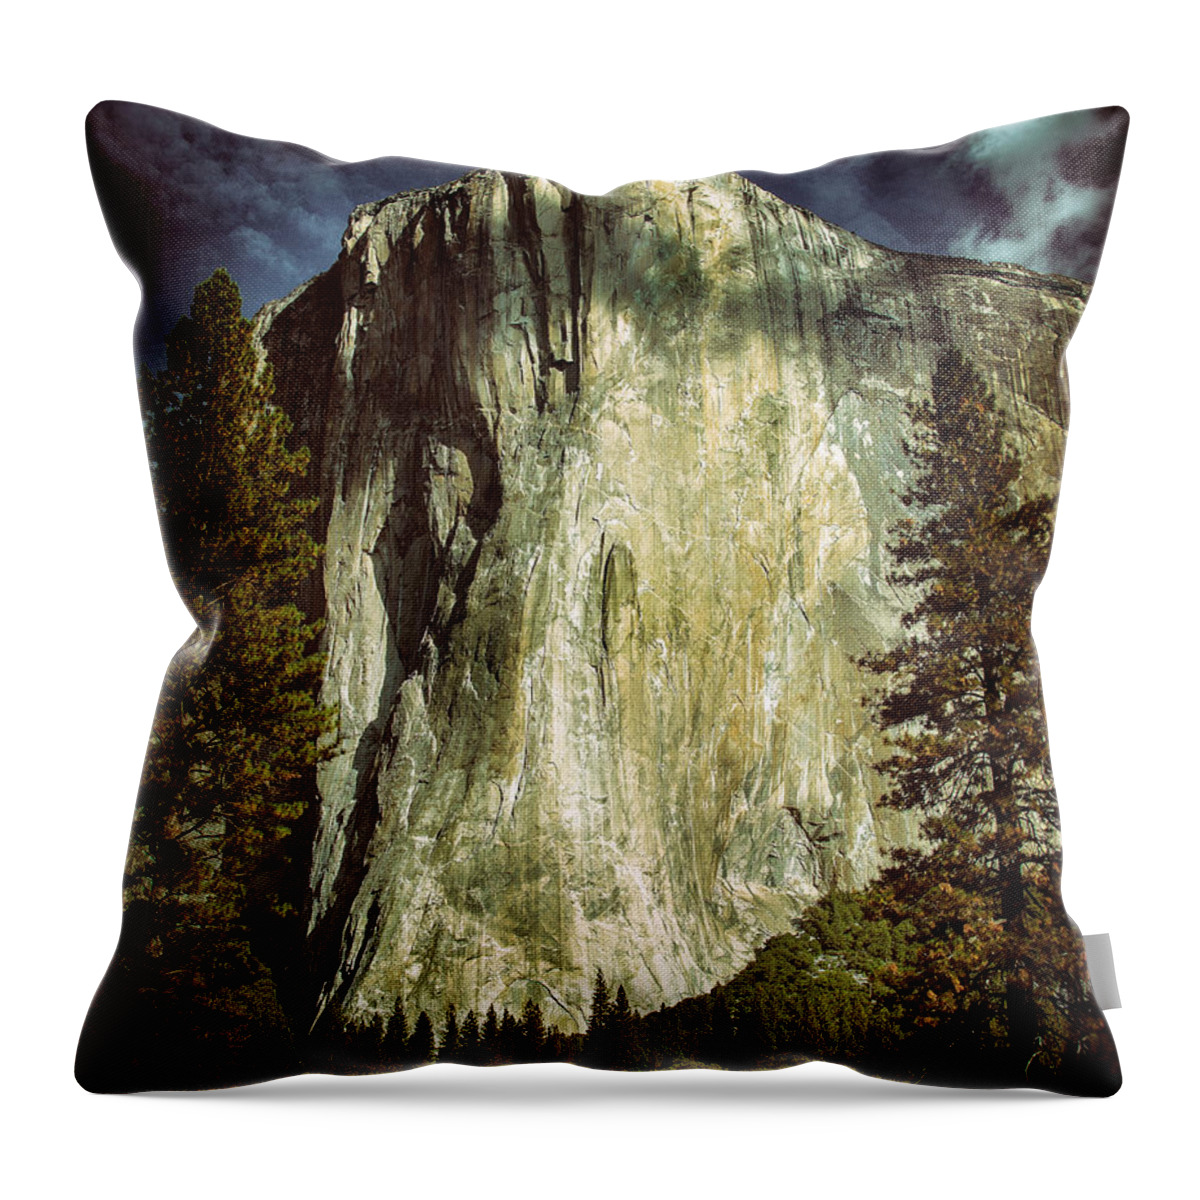 Yosemite Throw Pillow featuring the photograph El Capitan Yosmite Valley by Lawrence Knutsson